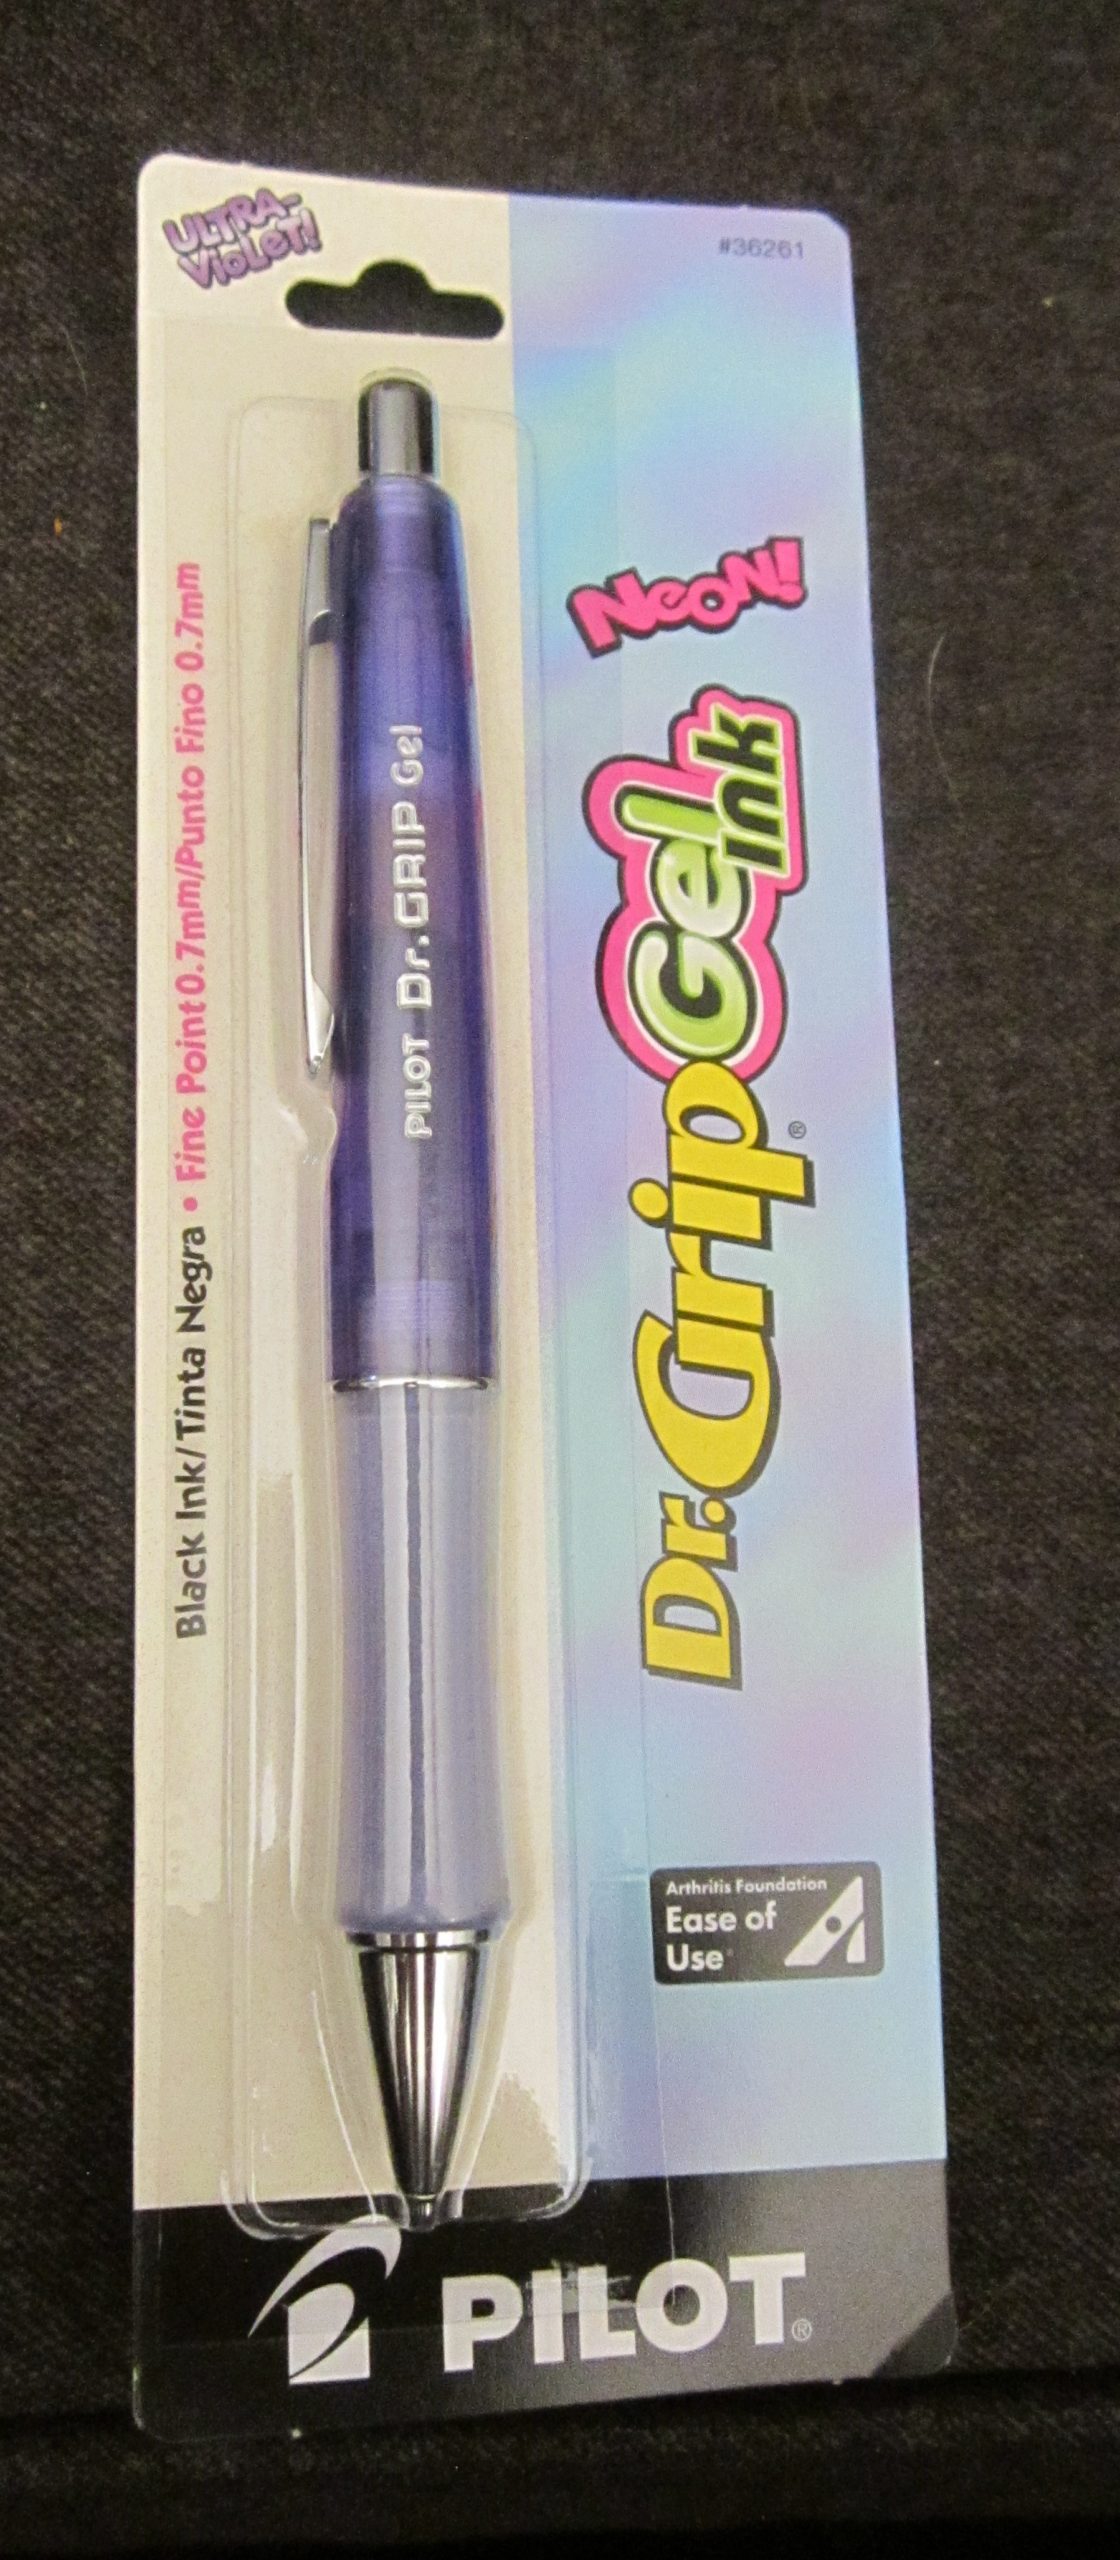 Pilot Dr. Grip Pure White Pen - Colors May Vary